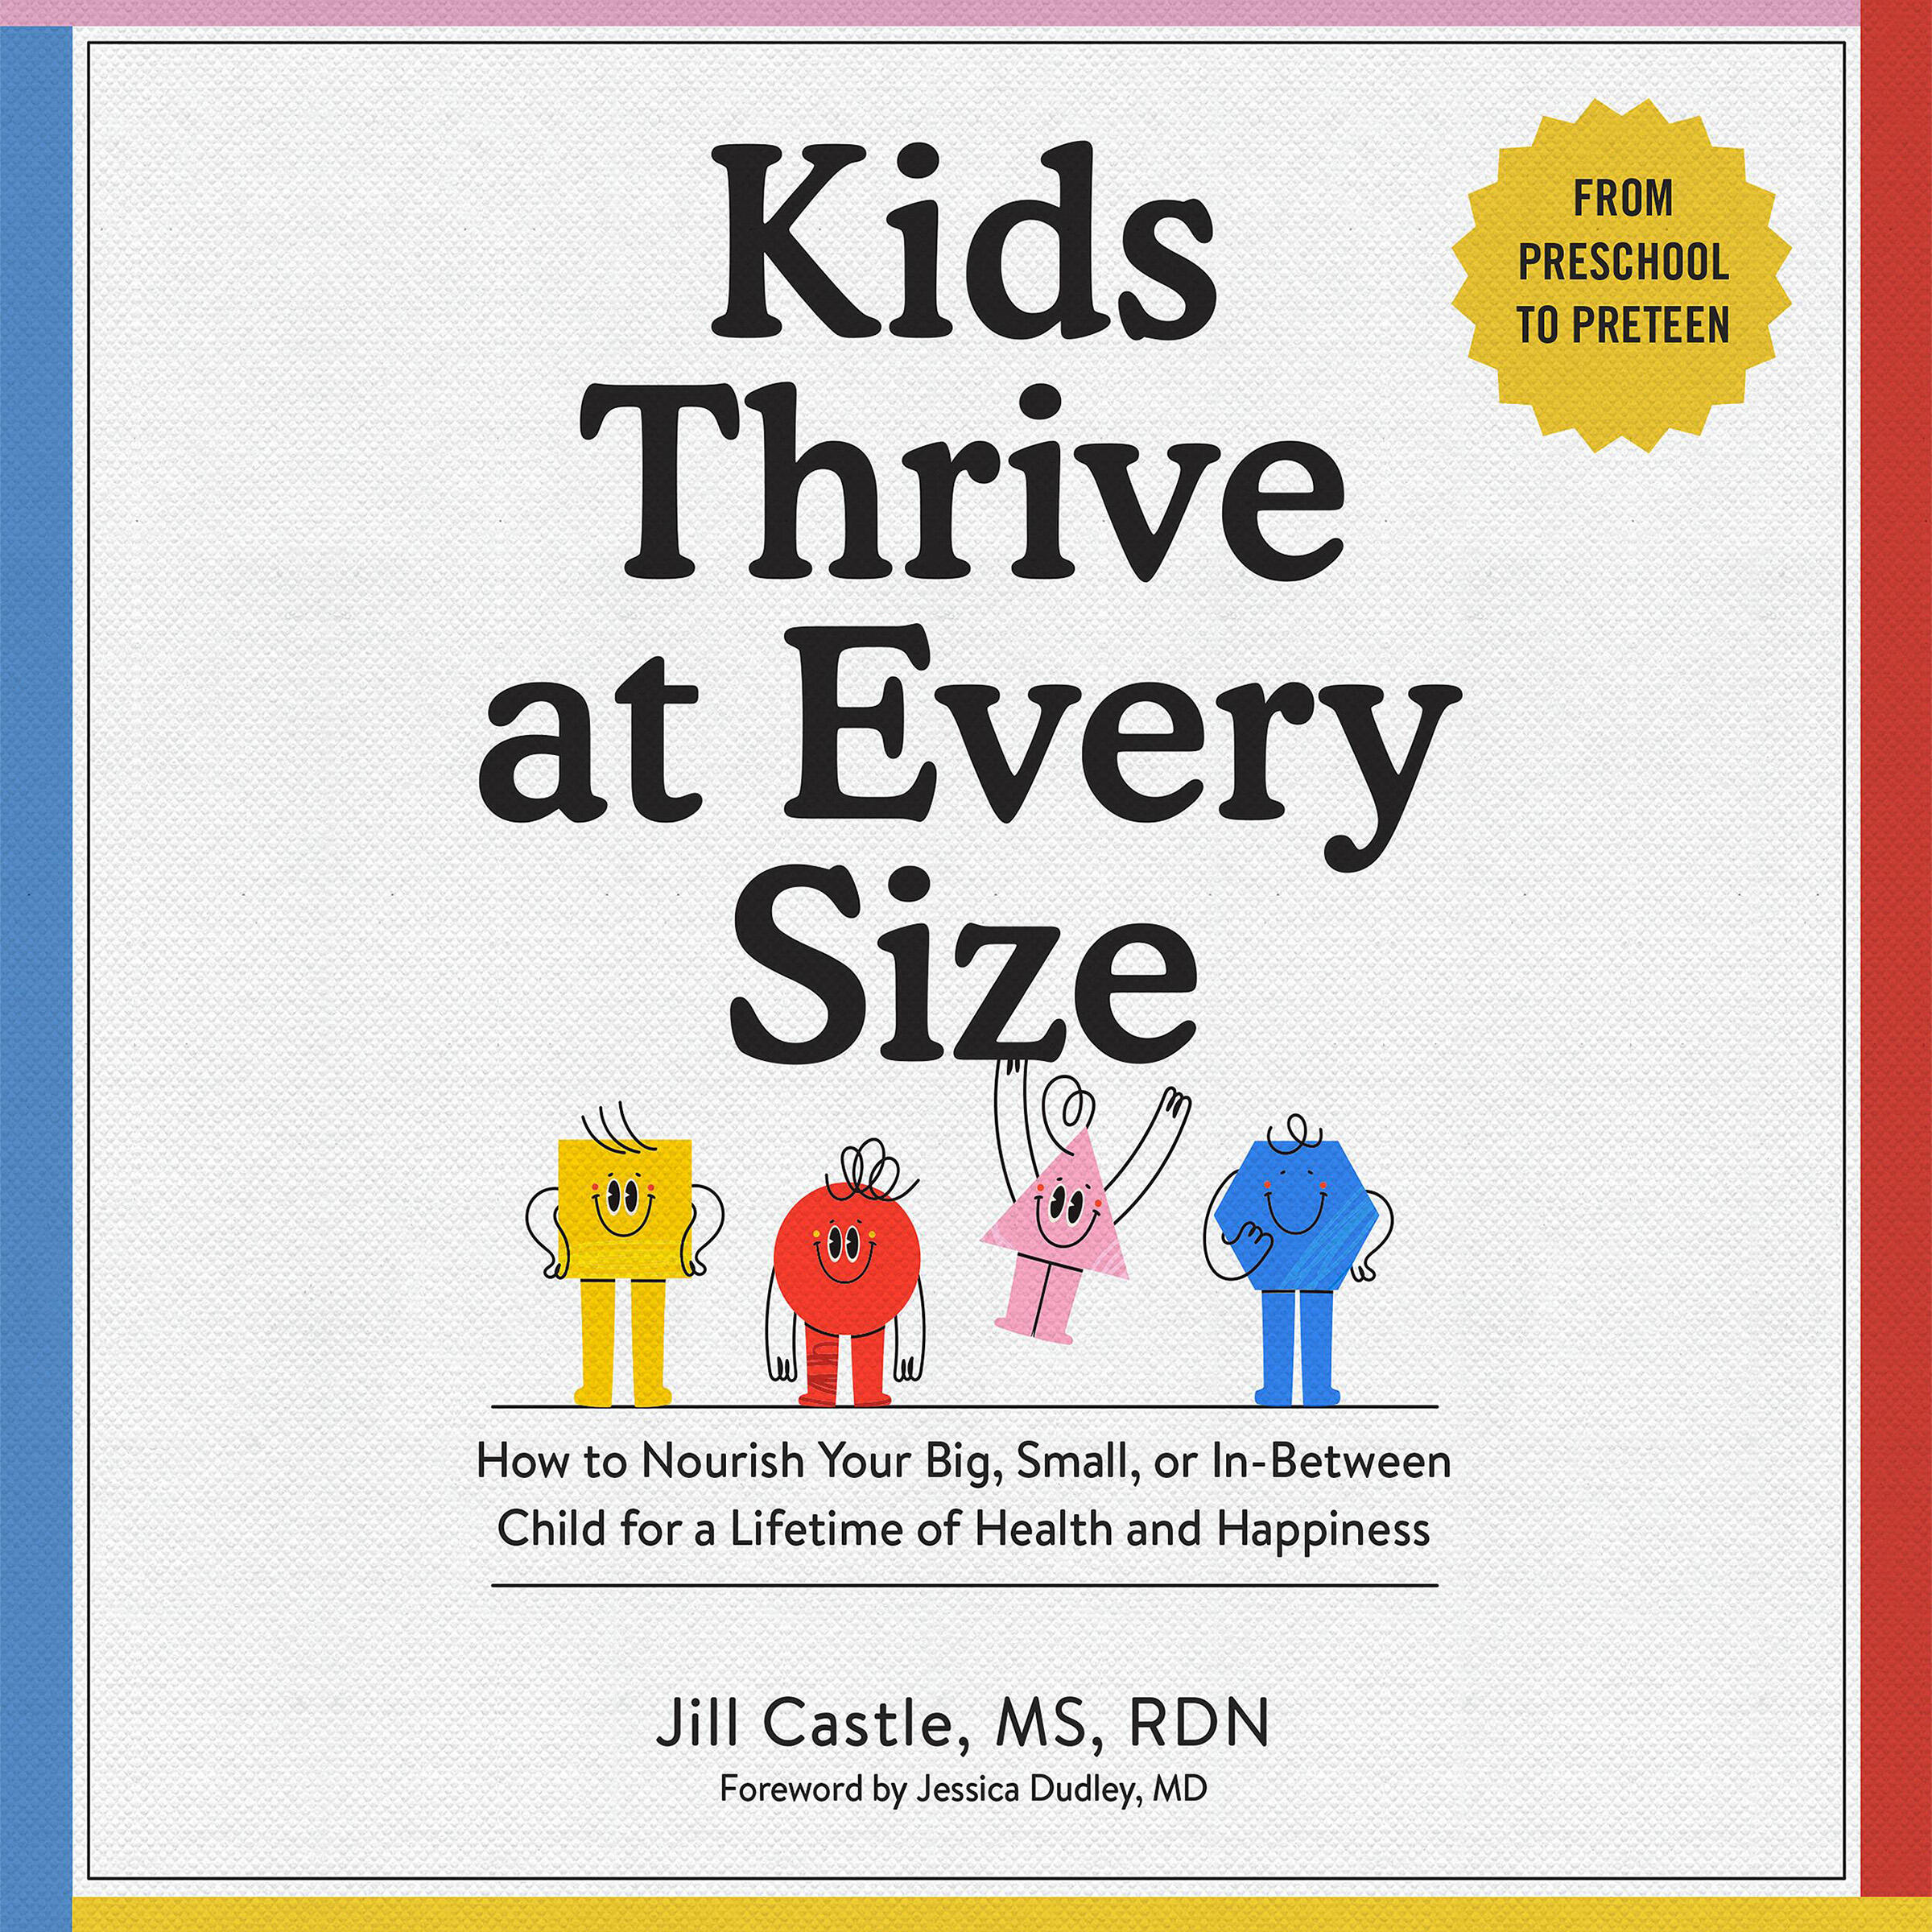 Kids Thrive at Every Size by Jill Castle, MS, RDN